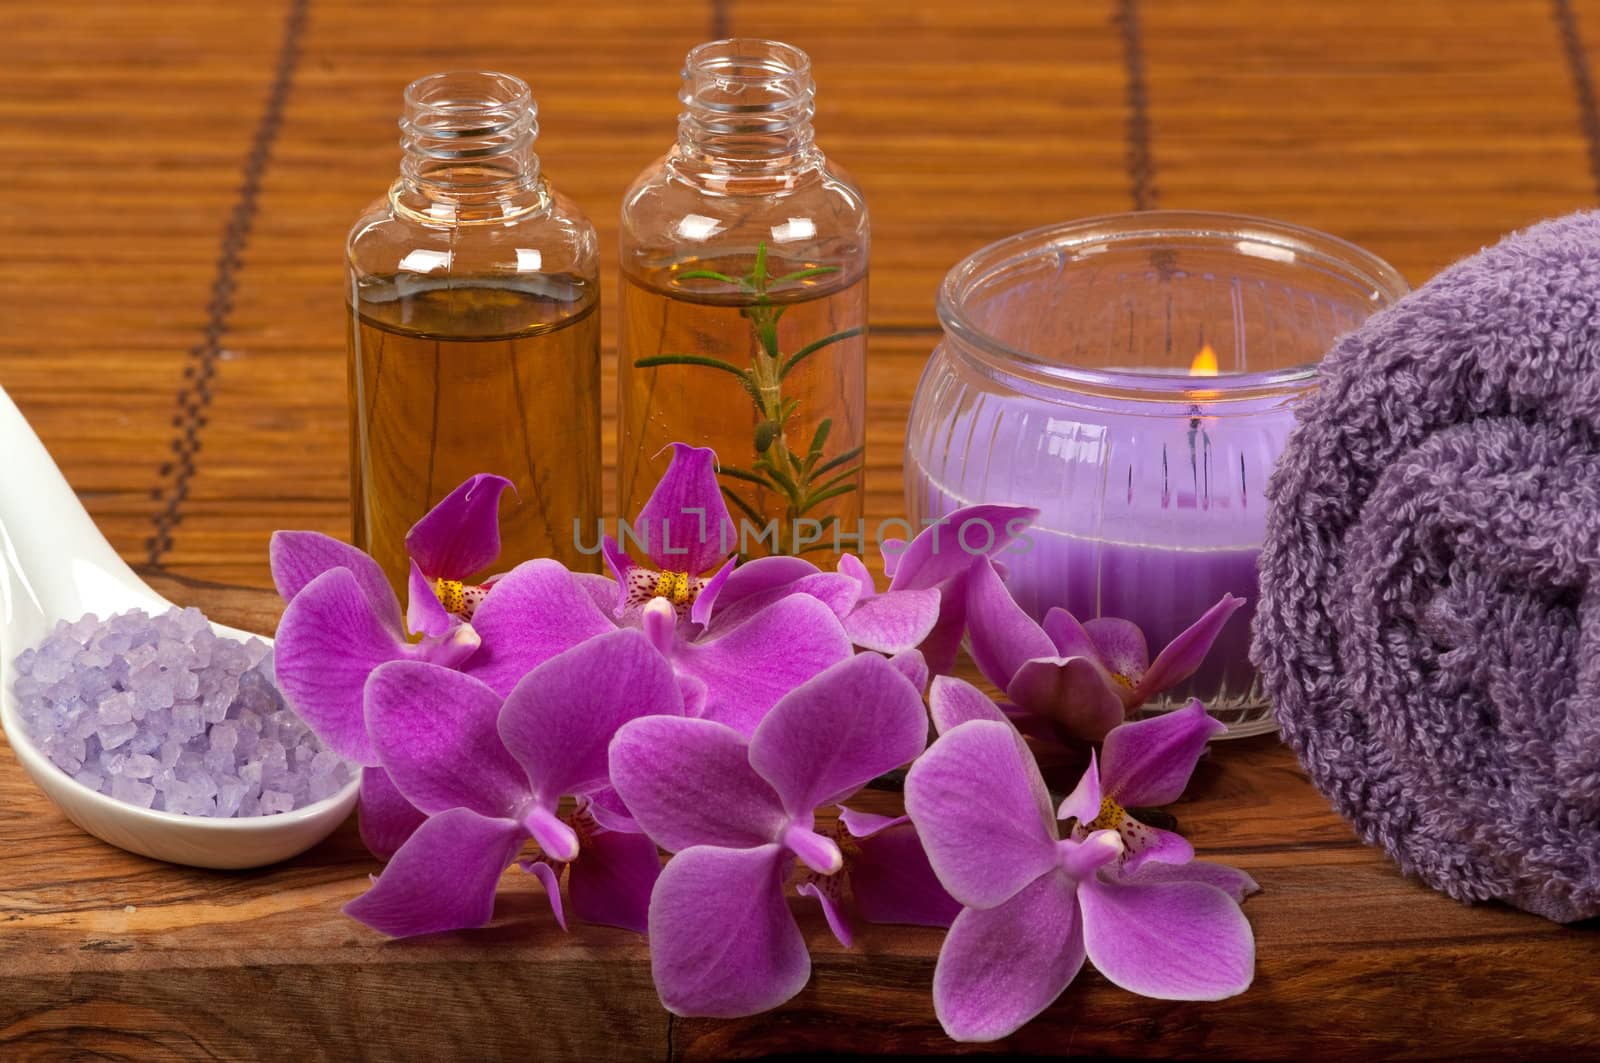 Spa treatment and aromatherapy